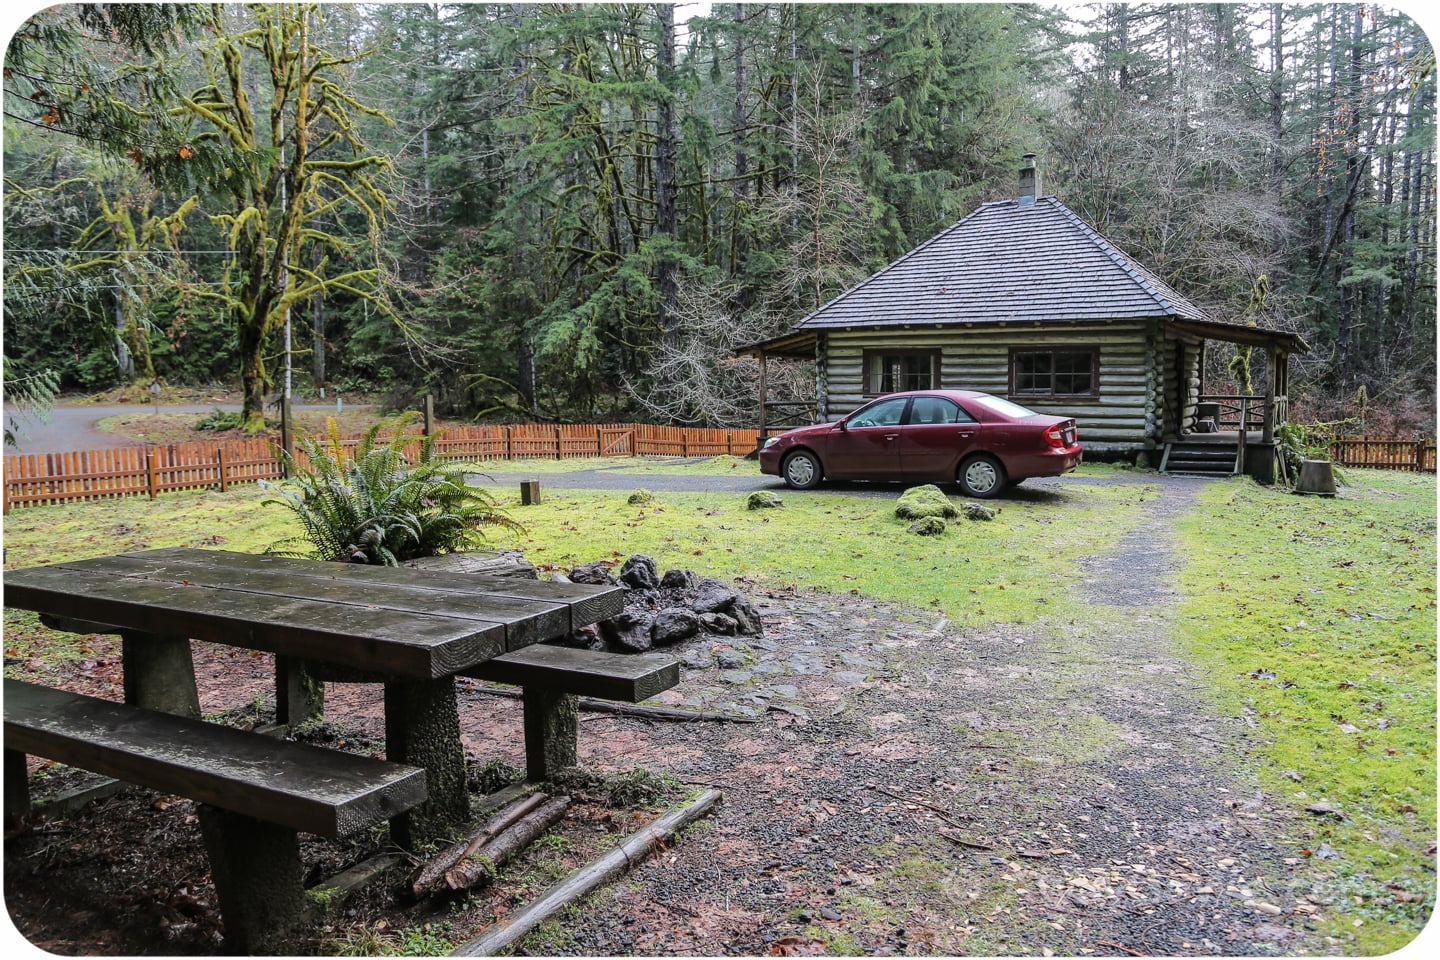 car in front of rustic log cabin in Washington State